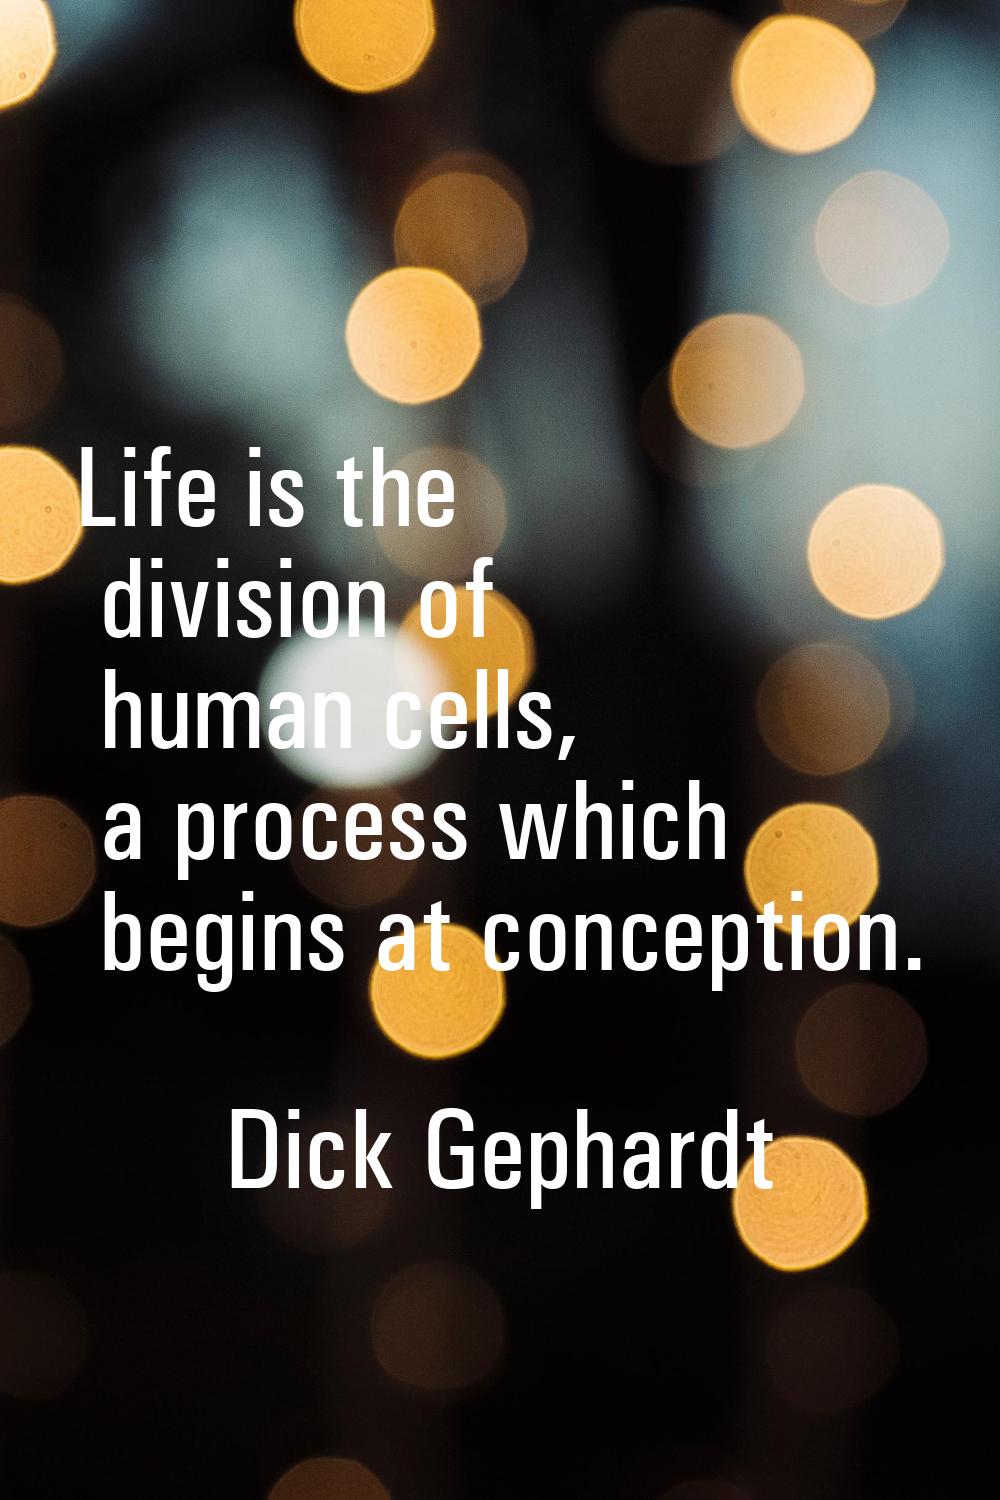 Life is the division of human cells, a process which begins at conception.